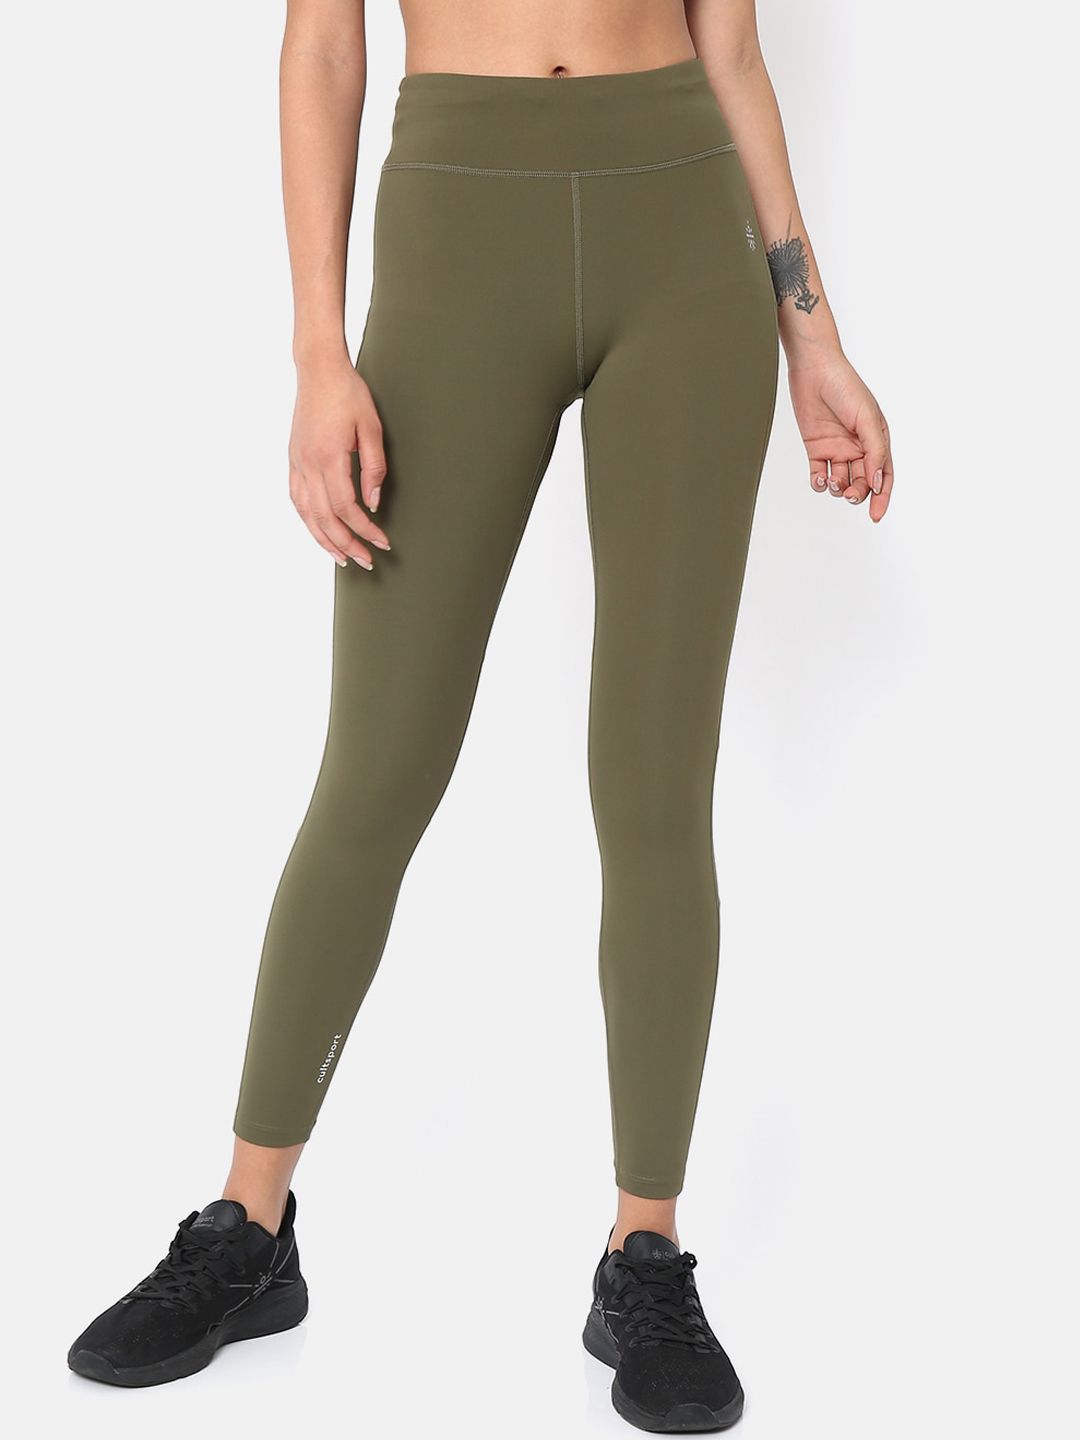 Cultsport Women Olive-Green Solid Absolute-Fit Mesh Tights Price in India